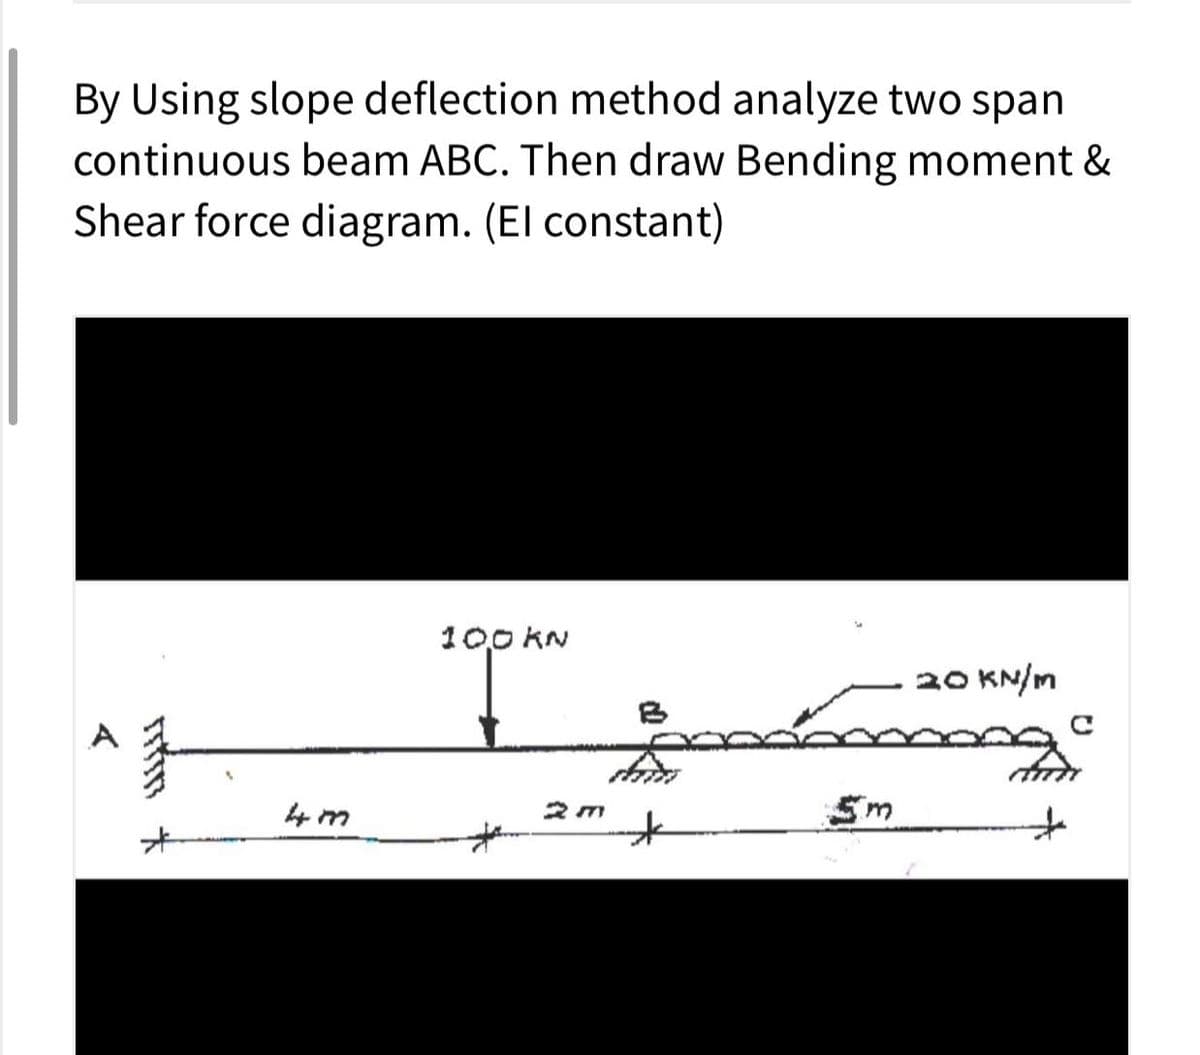 By Using slope deflection method analyze two span
continuous beam ABC. Then draw Bending moment &
Shear force diagram. (El constant)
100 KN
20 KN/m
4m
